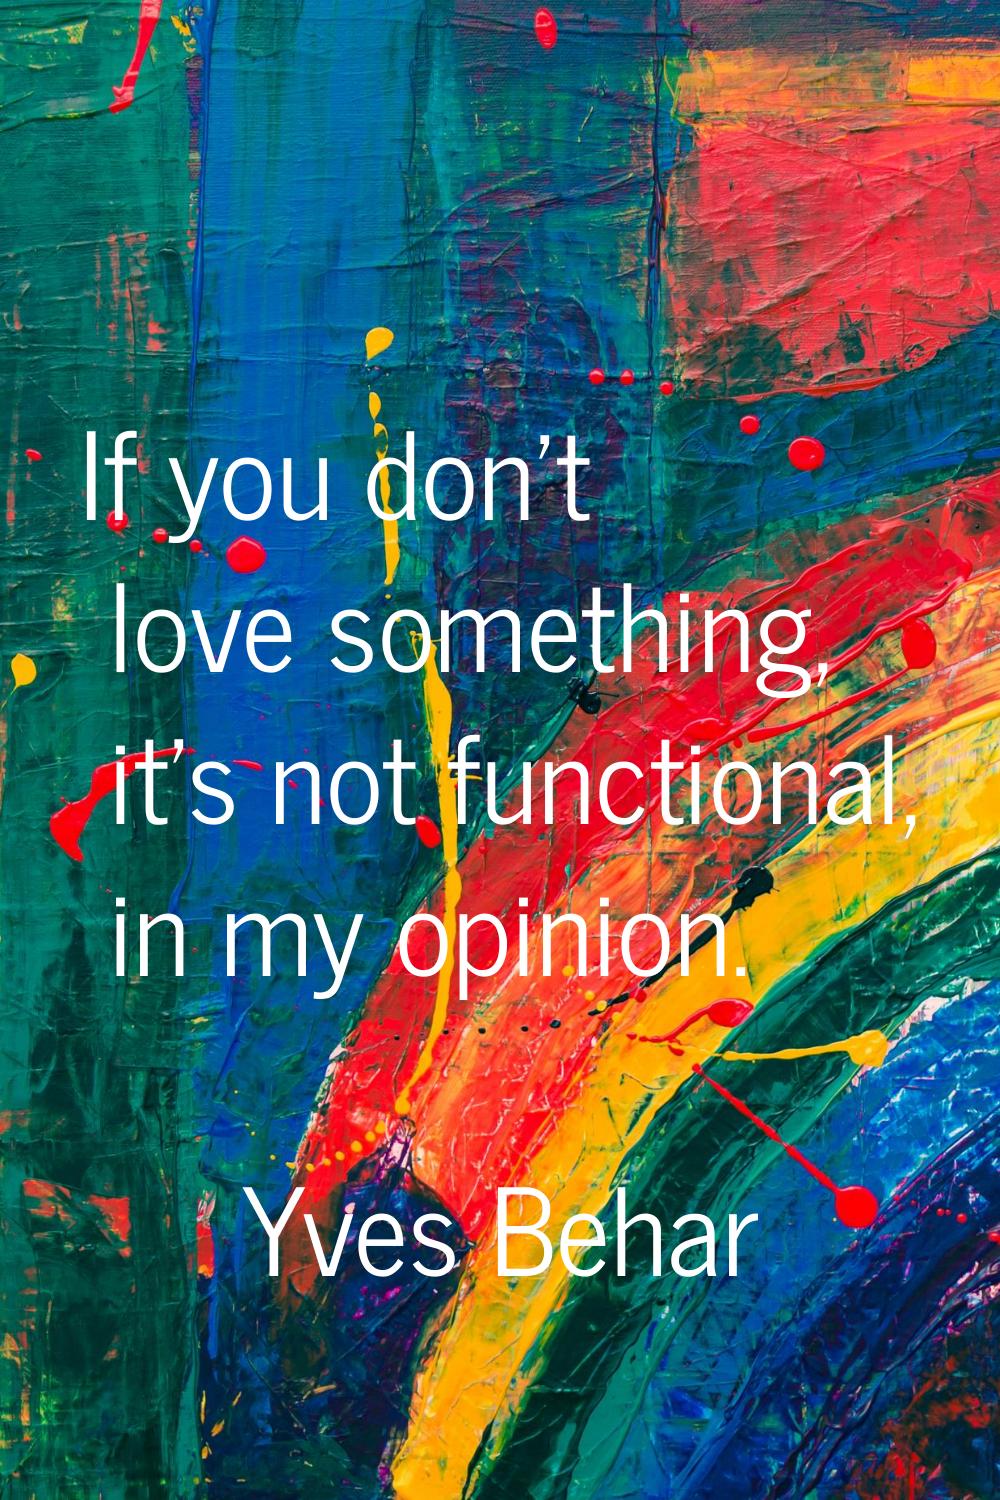 If you don't love something, it's not functional, in my opinion.